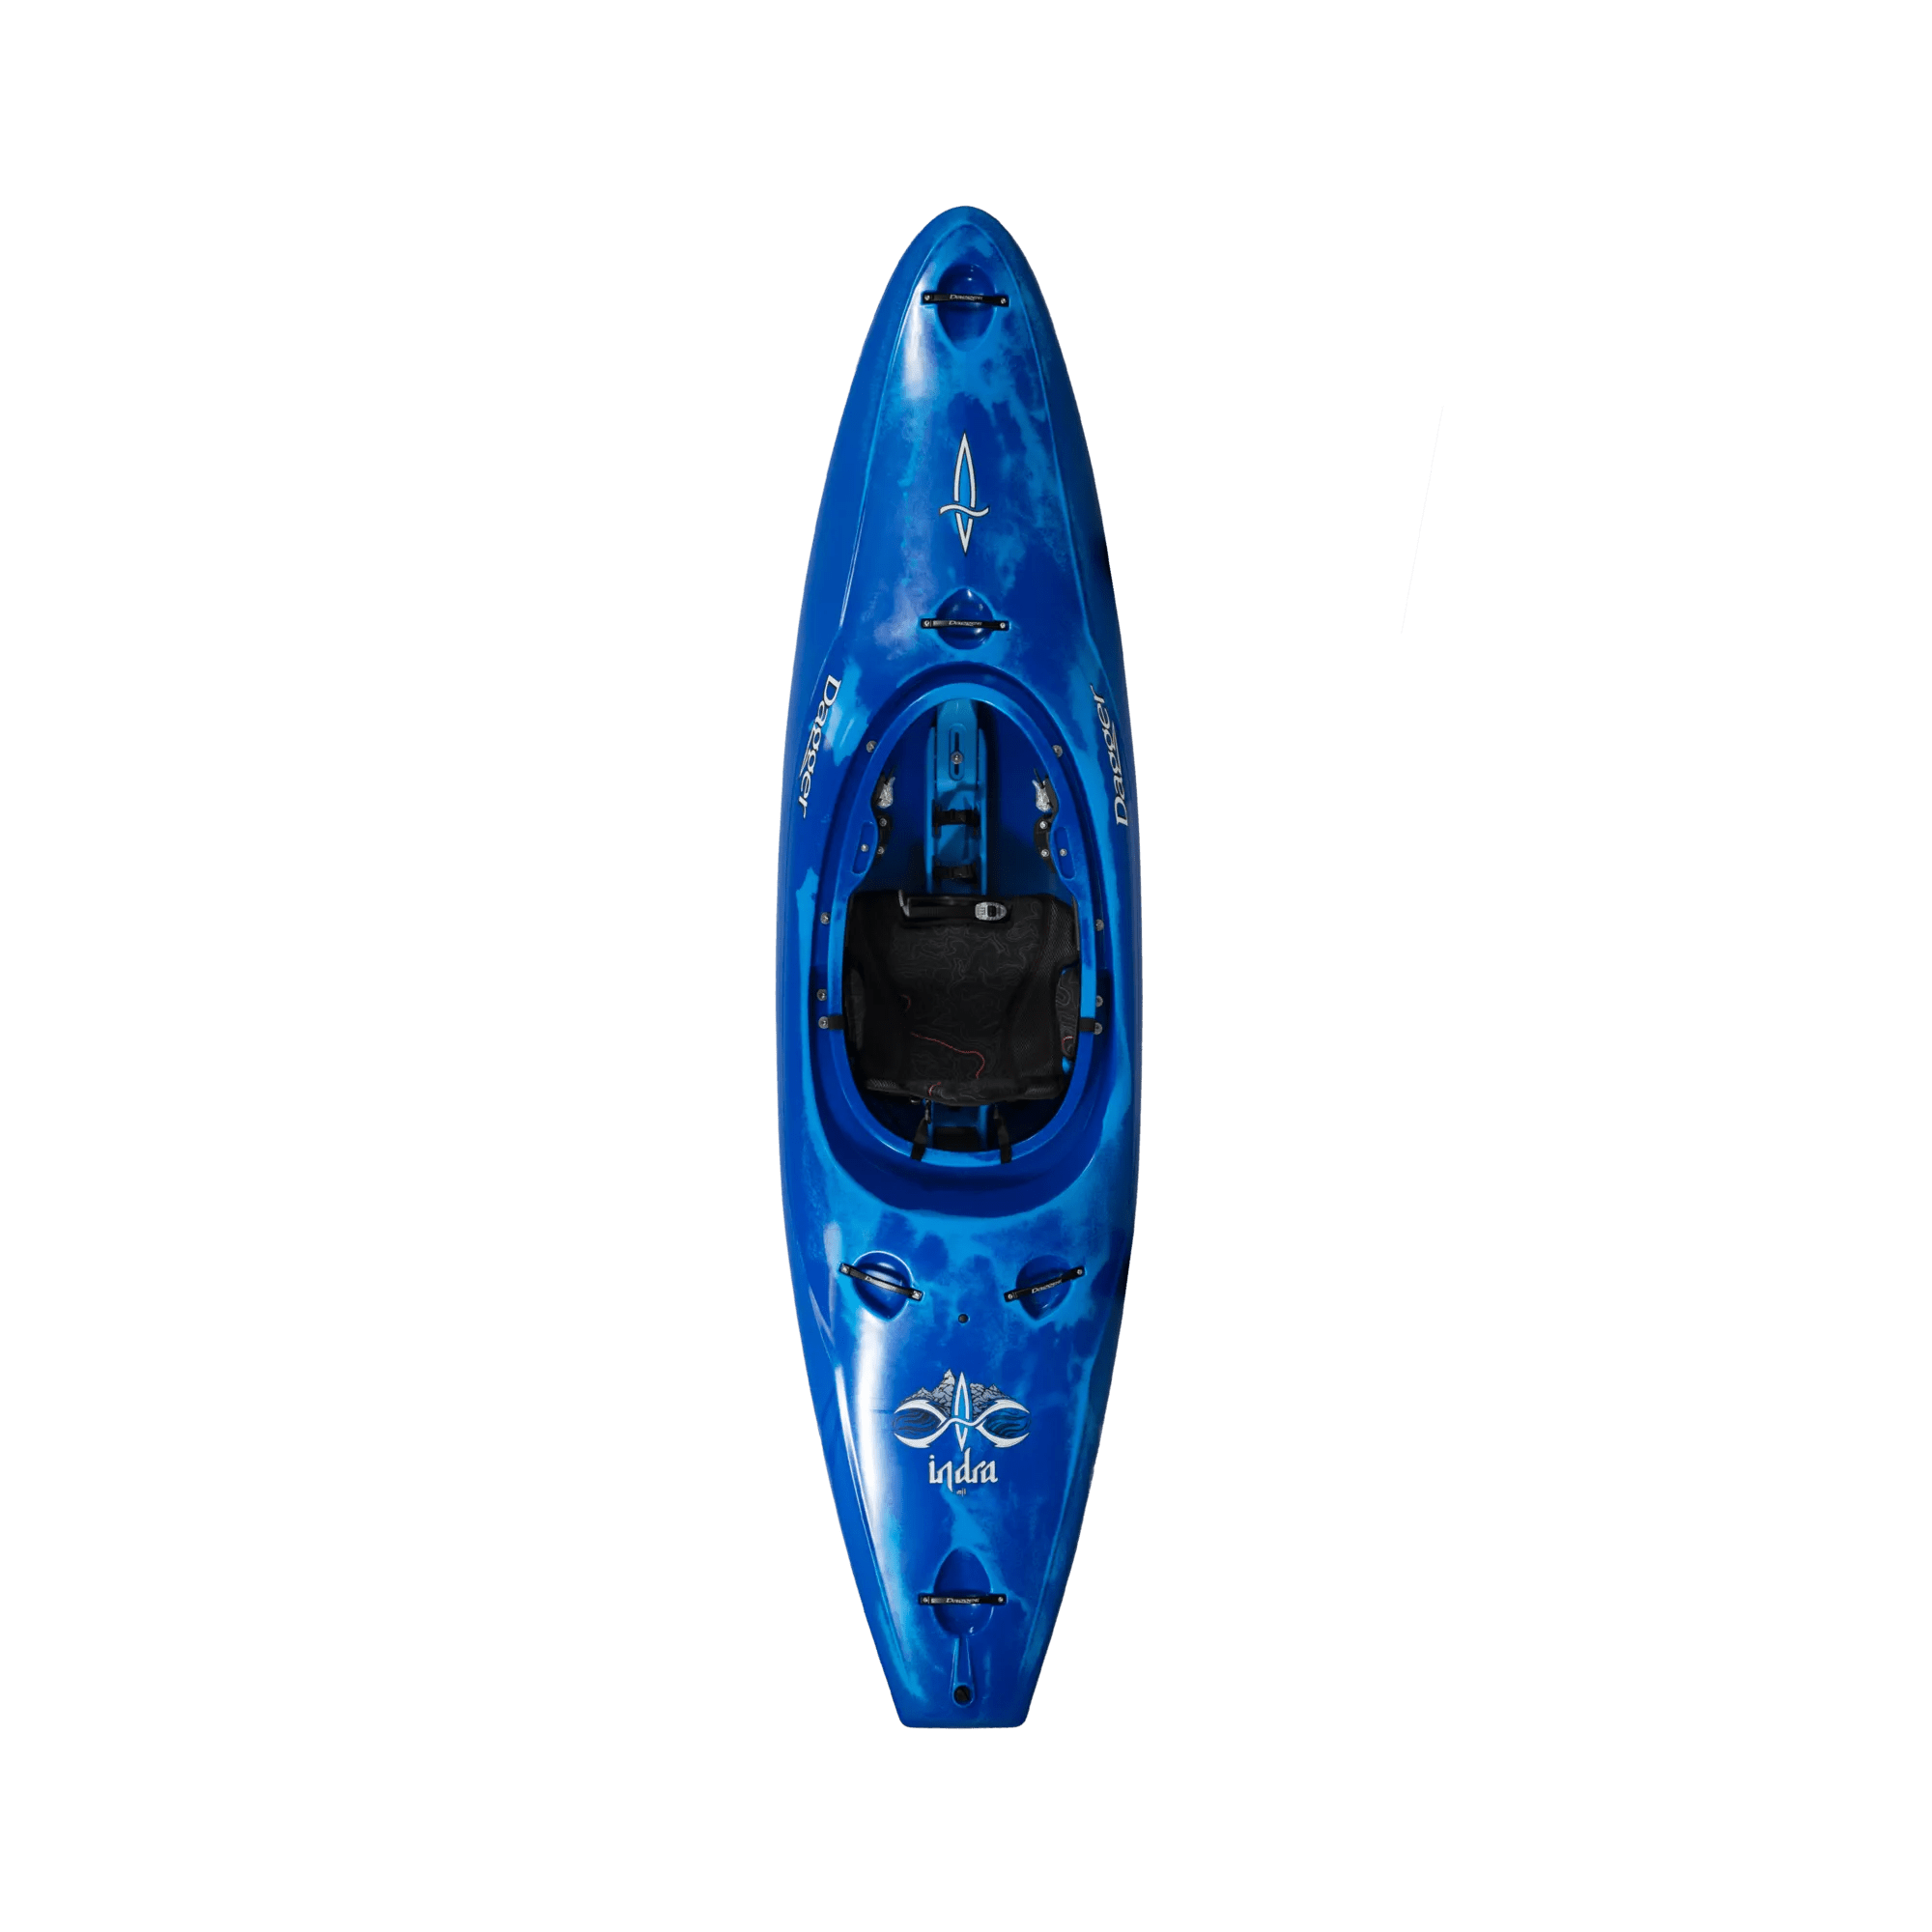 DAGGER - Indra MD/LG Creek Play Whitewater Kayak - Blue - 9010984206 - TOP 